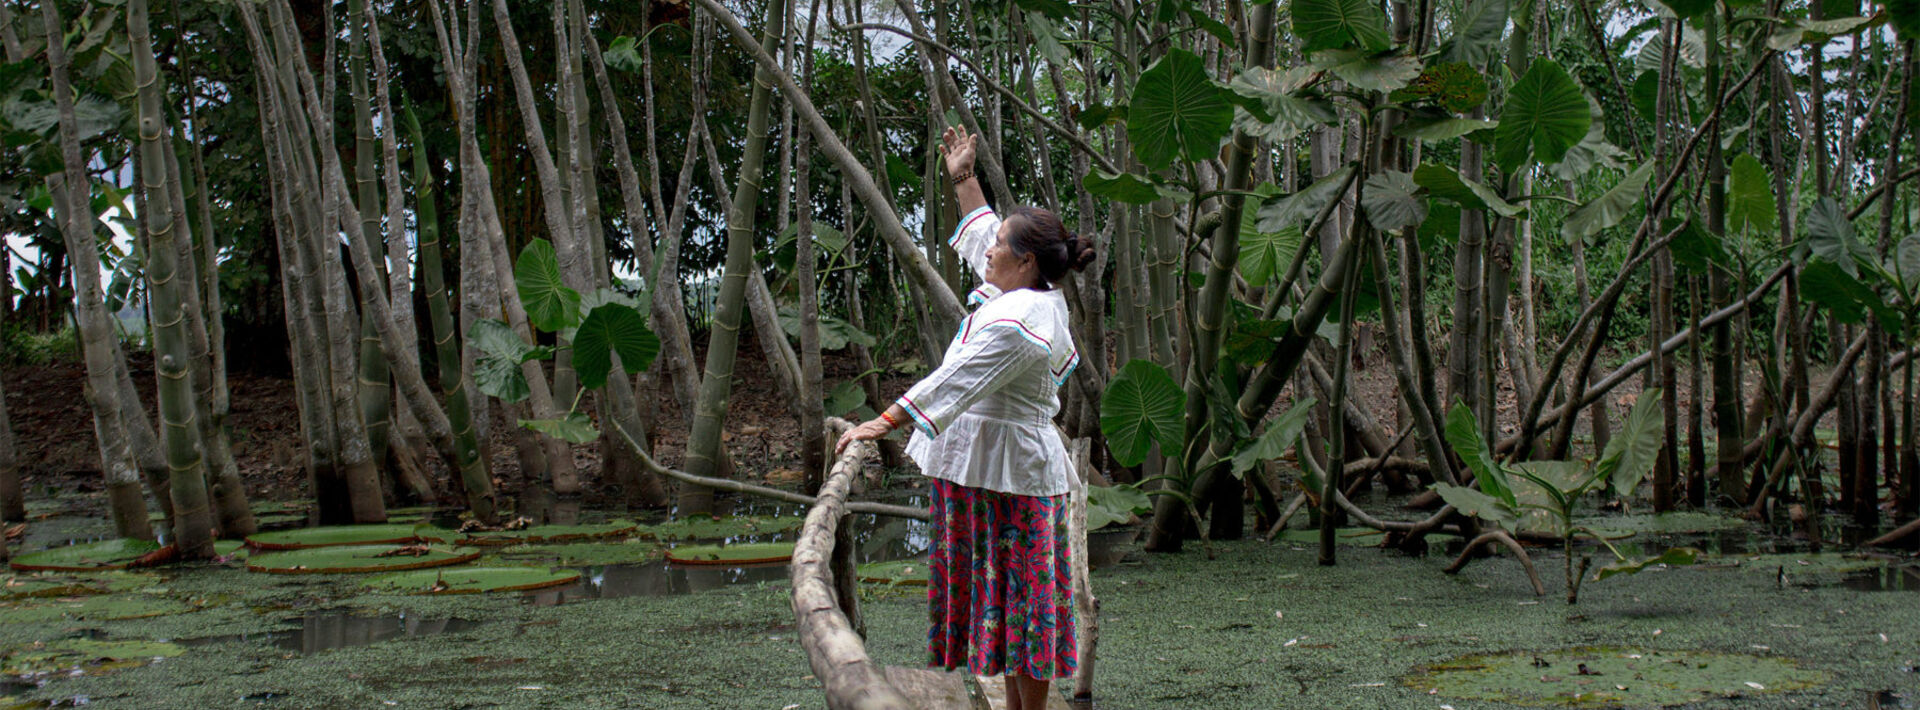 The magical moss helping women in rural Peru to become entrepreneurs -  Positive News